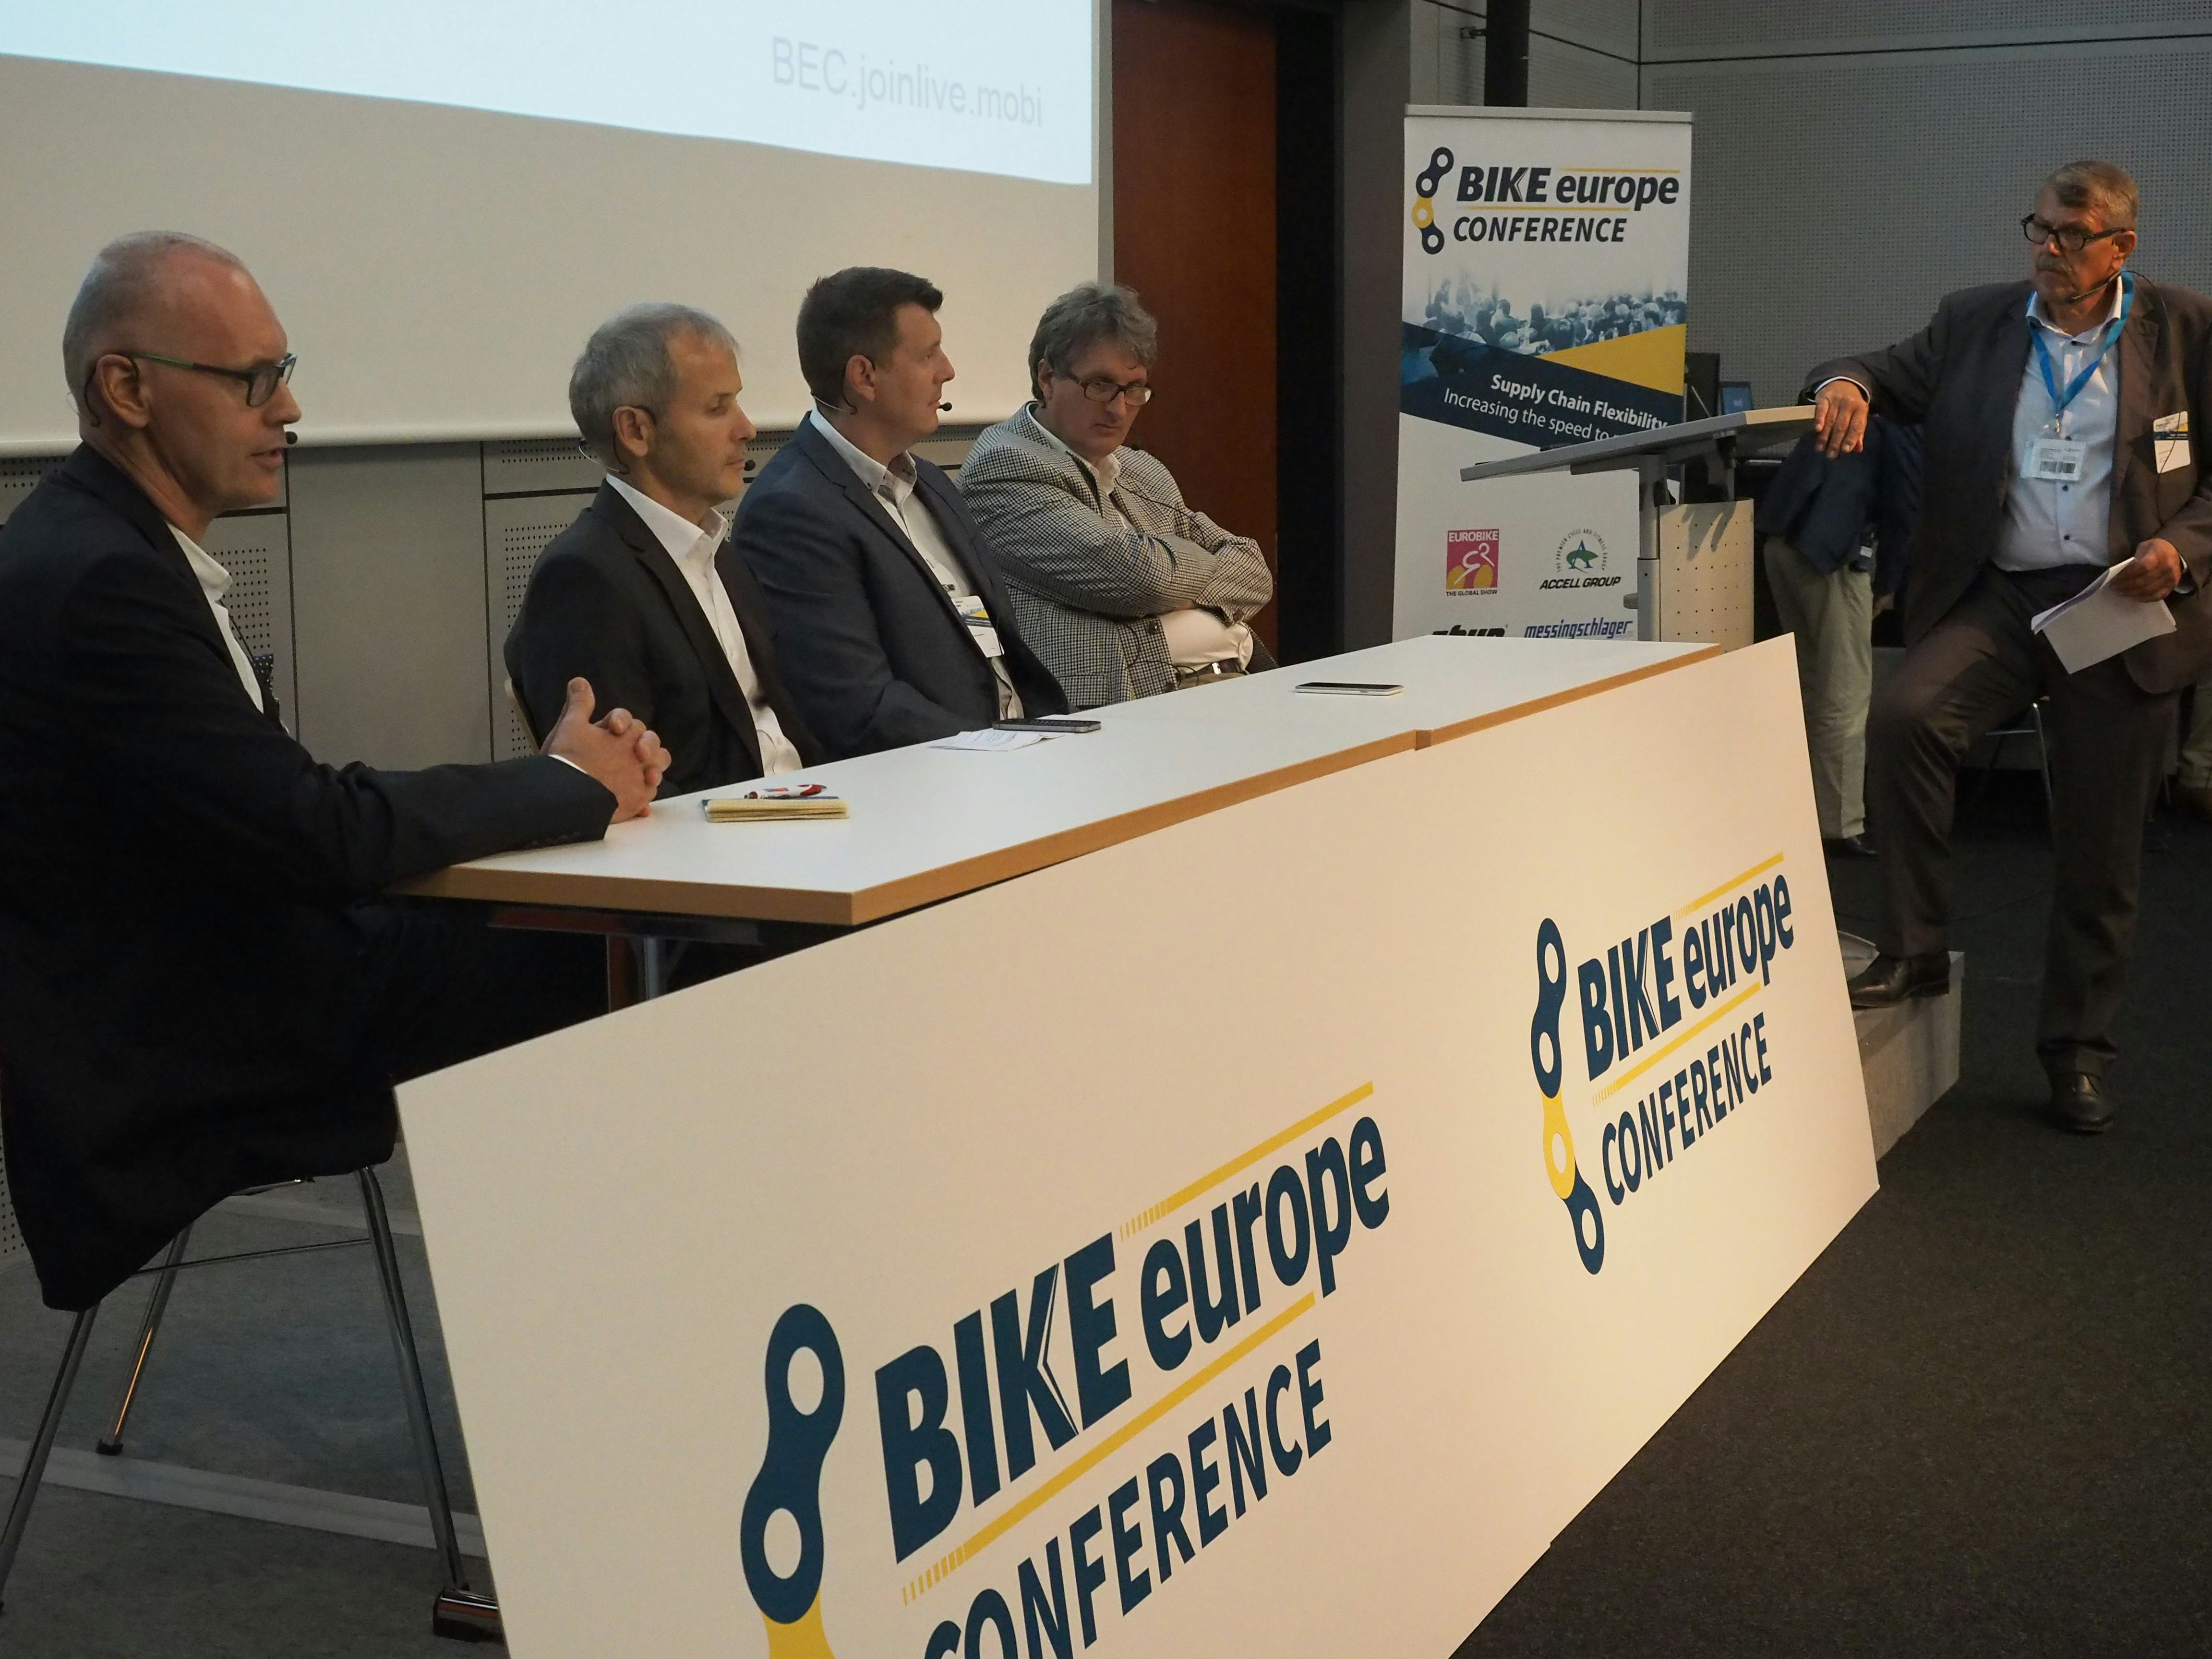 Next to keynote speakers the agenda of the Bike Europe Conference on Omni-Channel  also includes Q&A sessions. – Photo Peter Hummel 